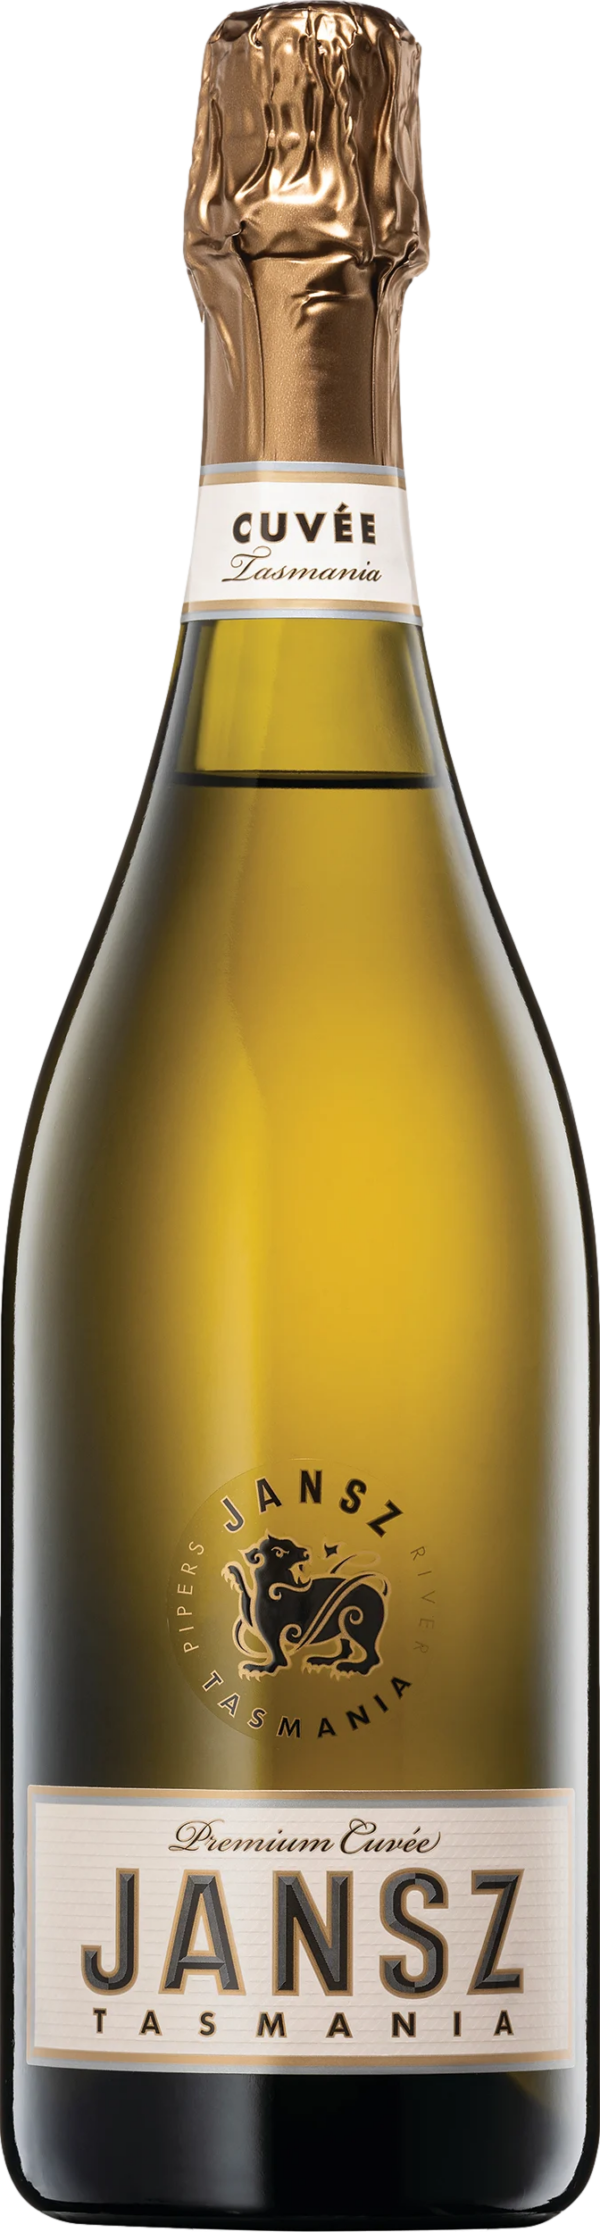 Product image of Jansz Premium Cuvee from 8wines